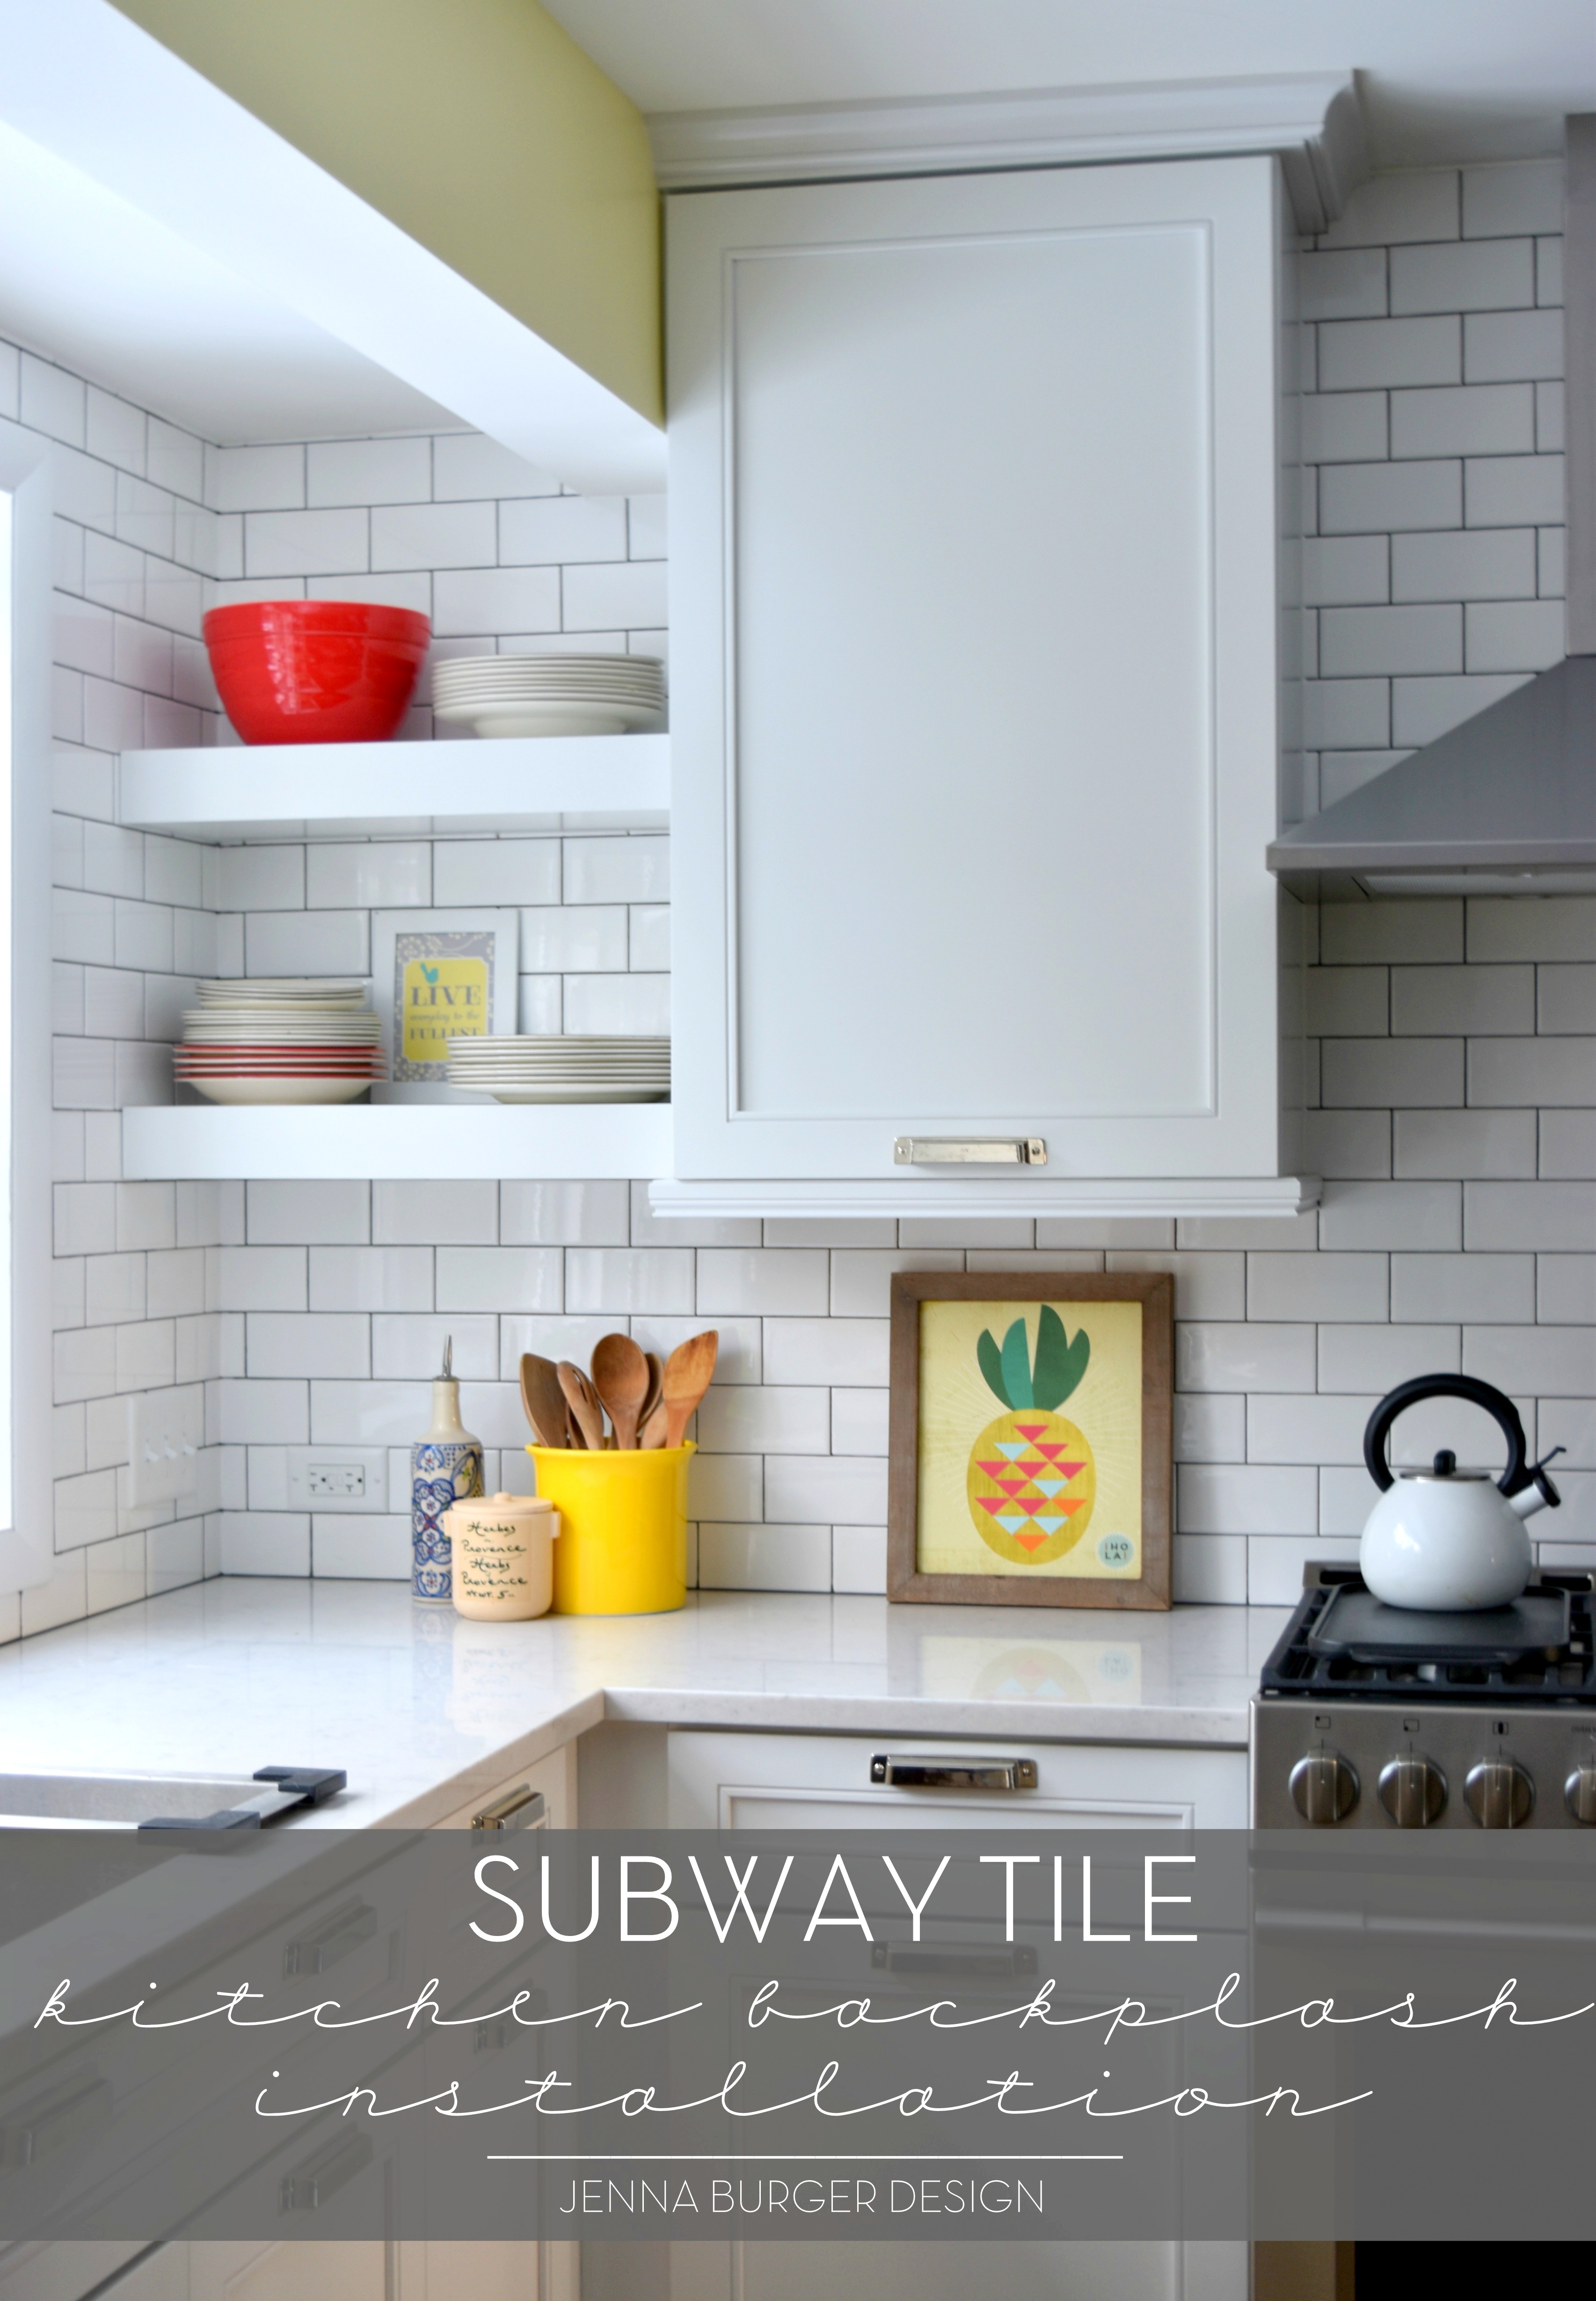 Subway Tile Kitchen Backsplash, How Much Does Subway Tile Cost Per Square Foot